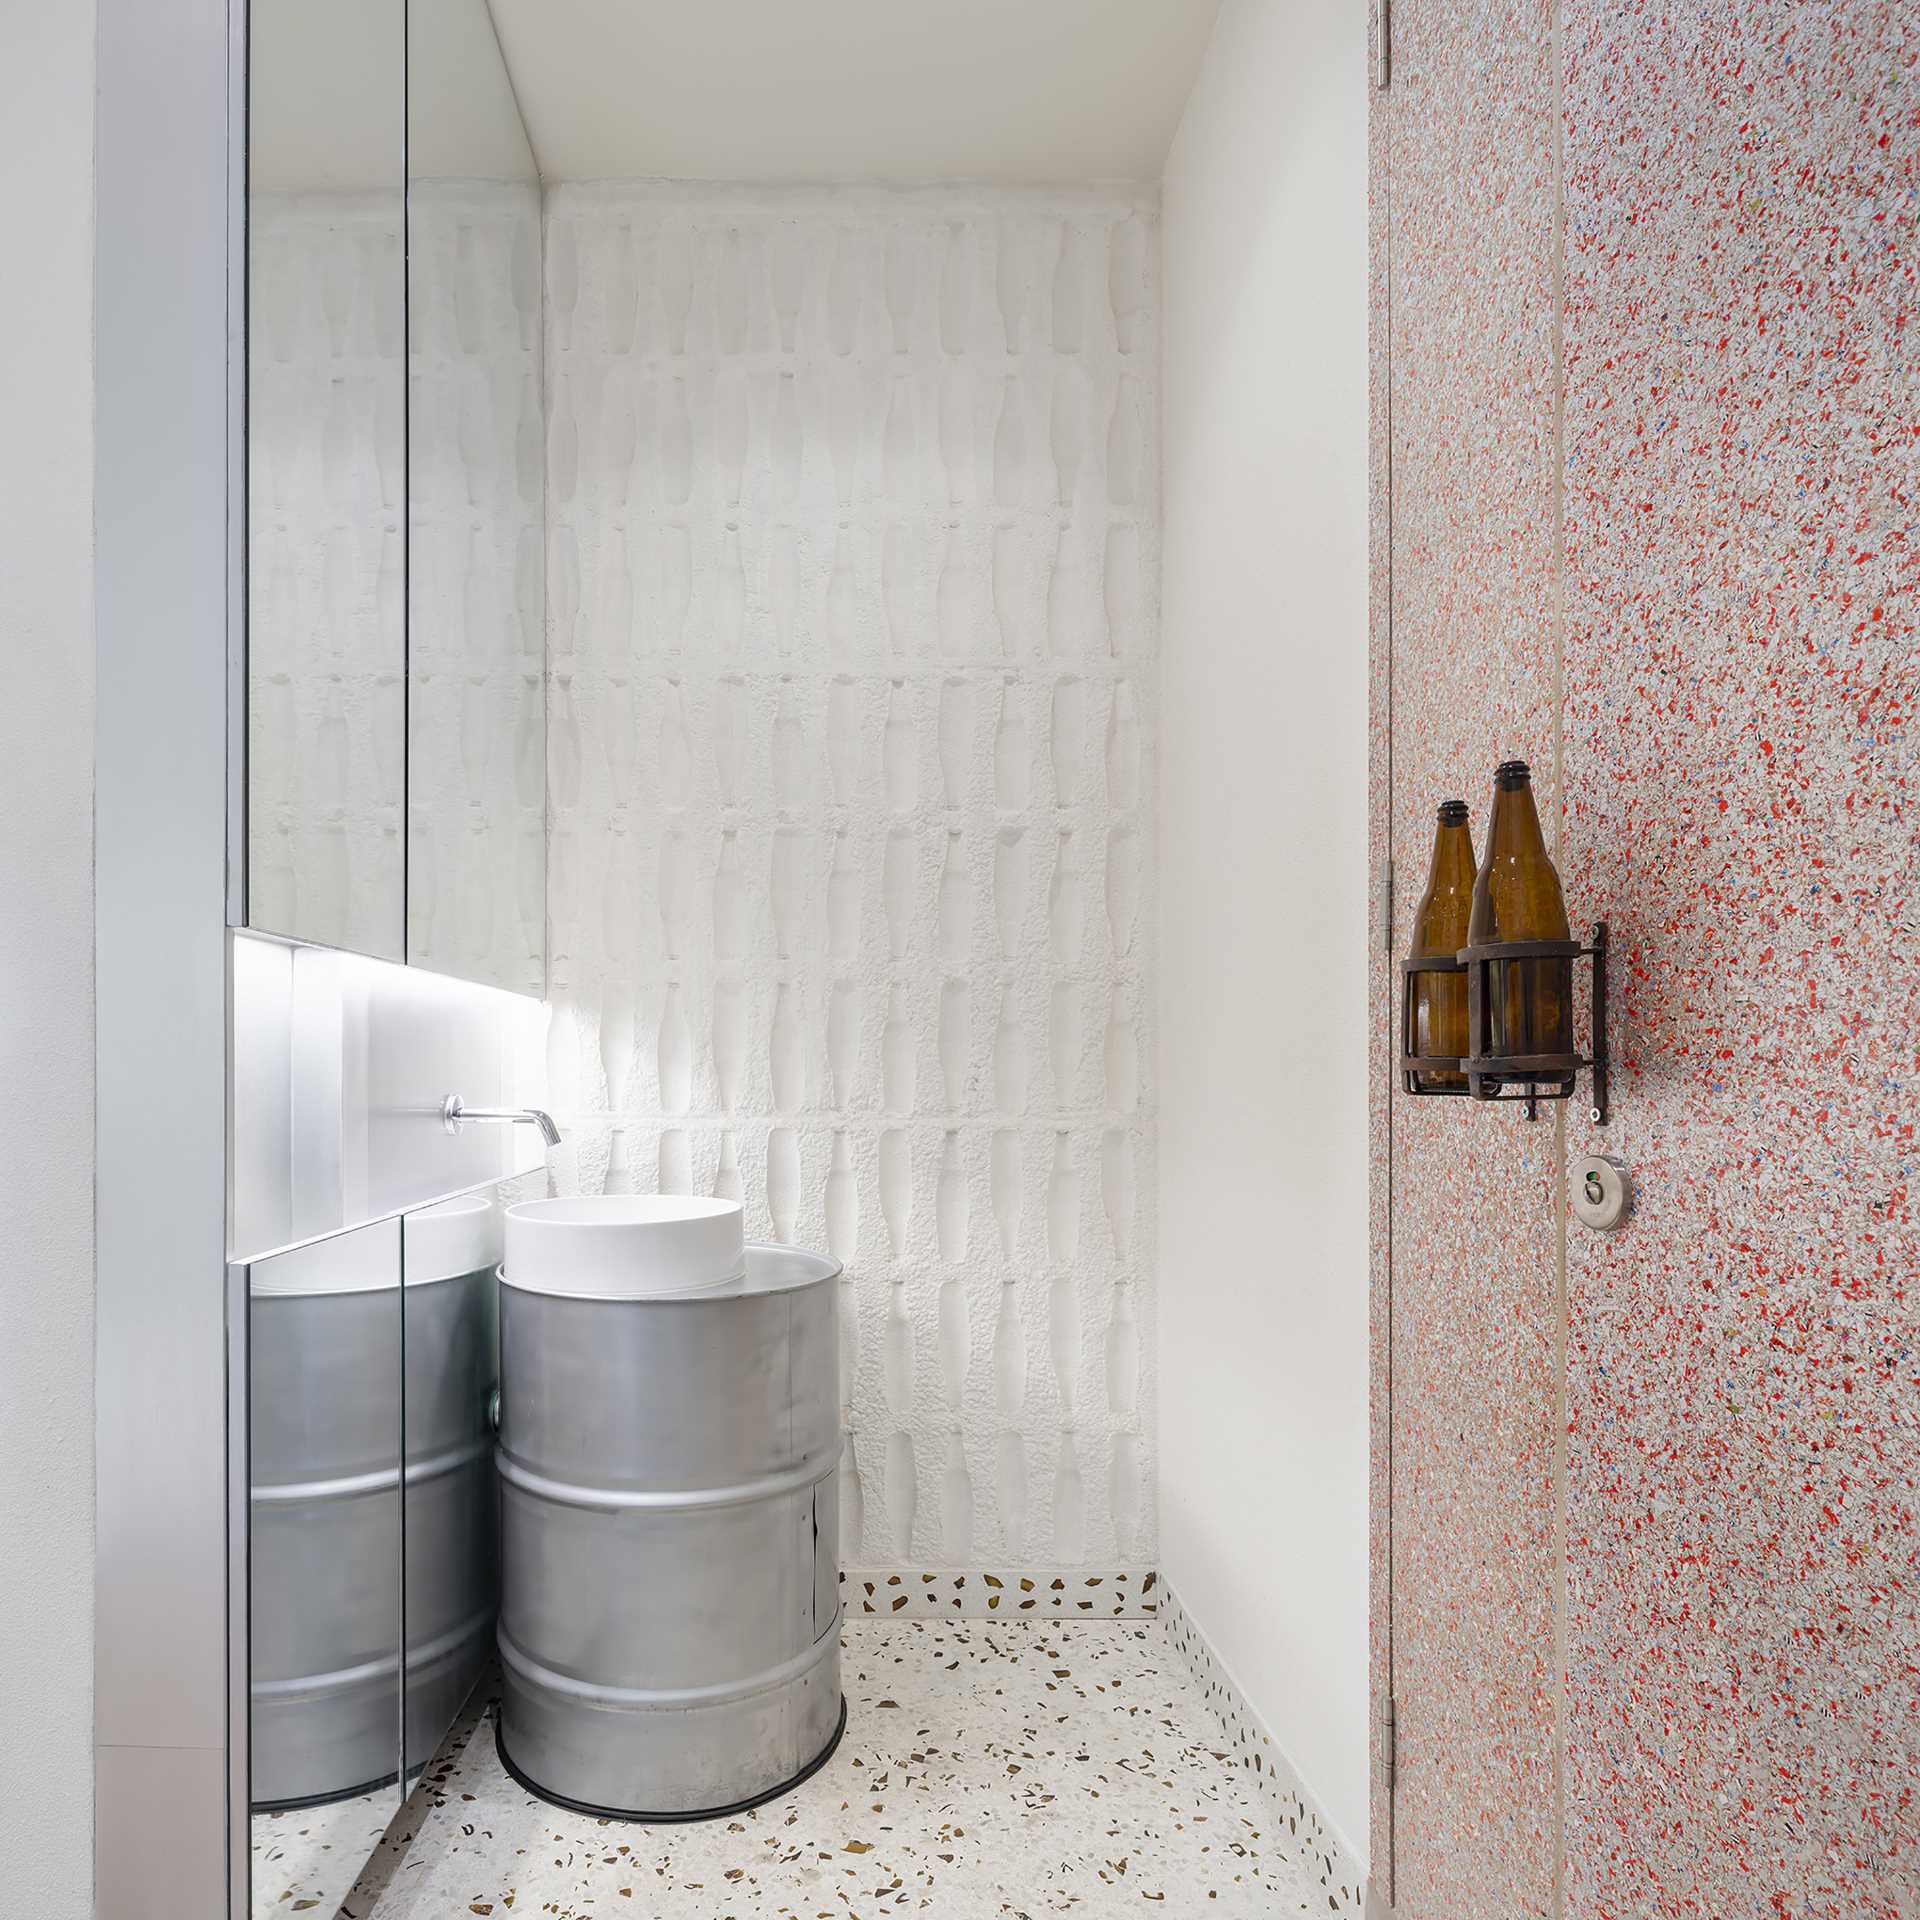 This cafe bathroom includes a used galvanized iron oil tank as a basin counter, and used glass bottles as a door knob.